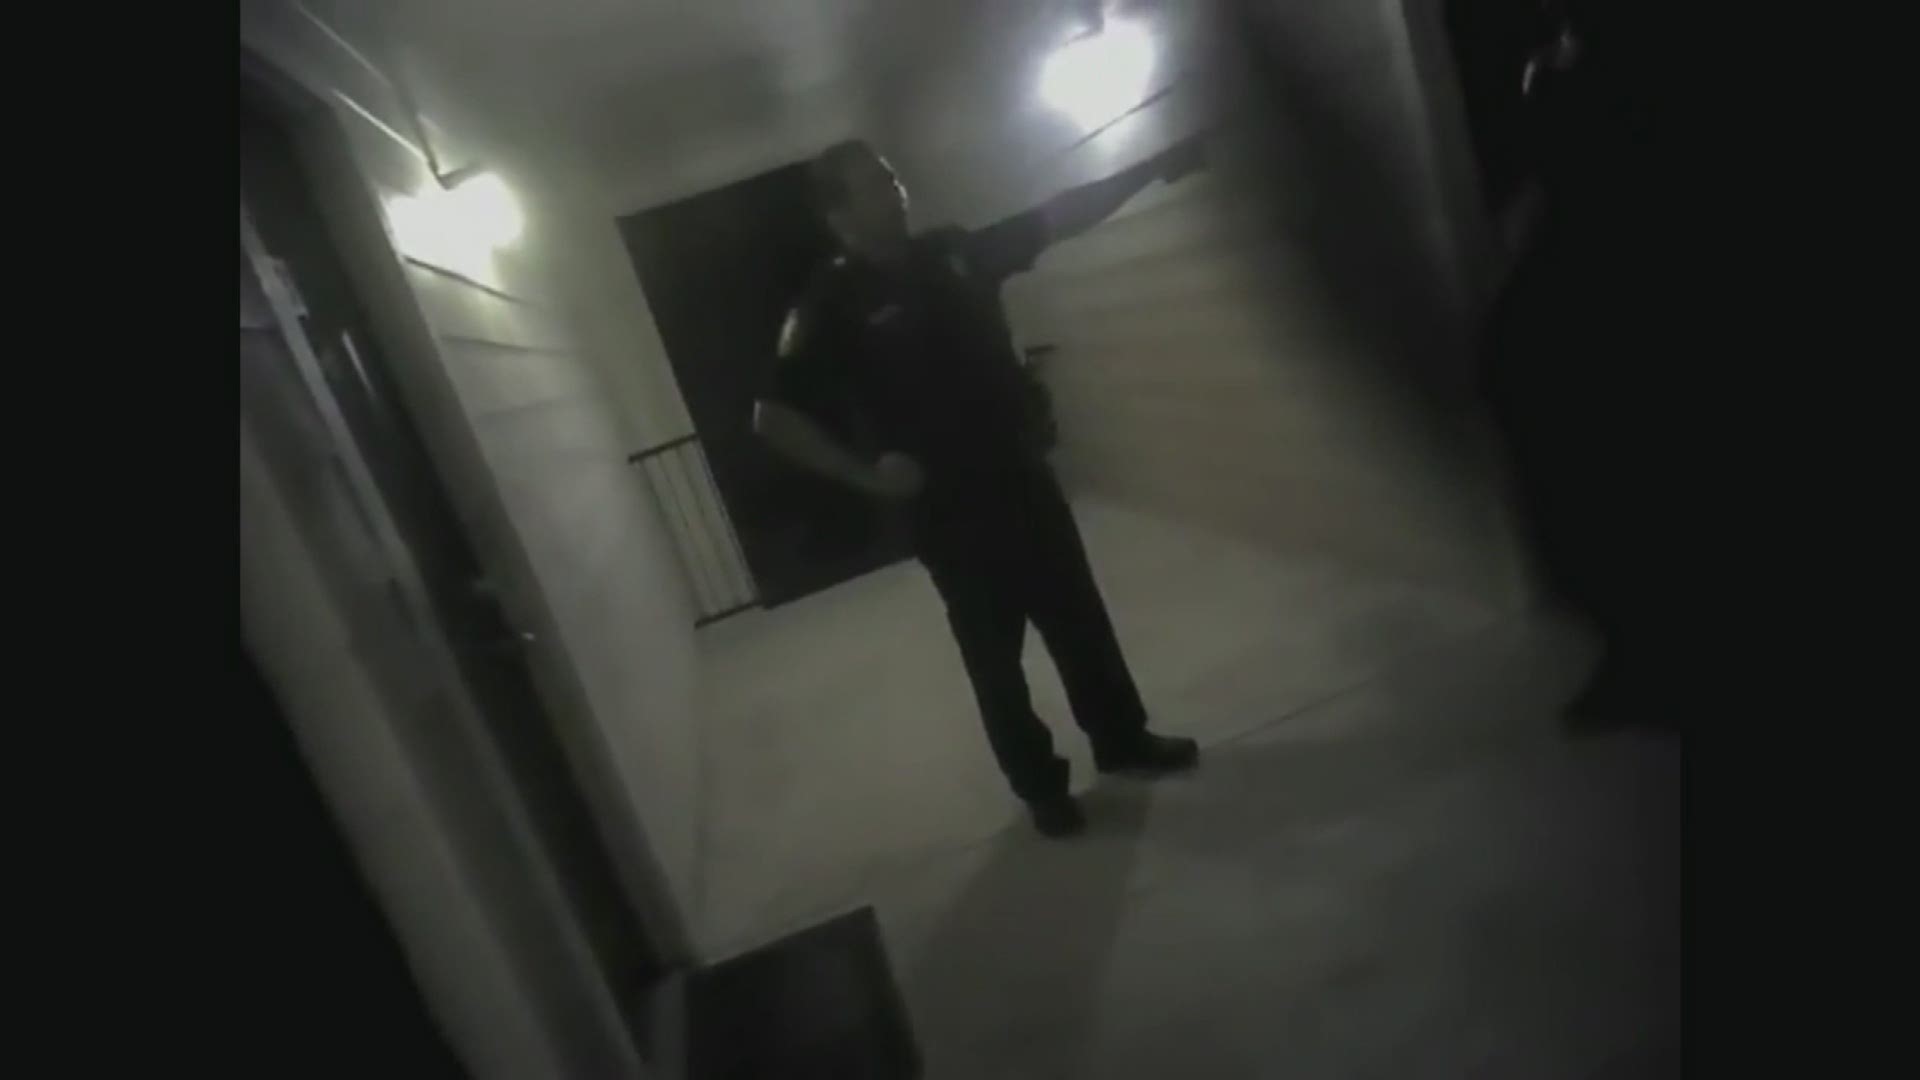 RAW VIDEO: FWPD release body cam video, police chief fires 22-year veteran officer